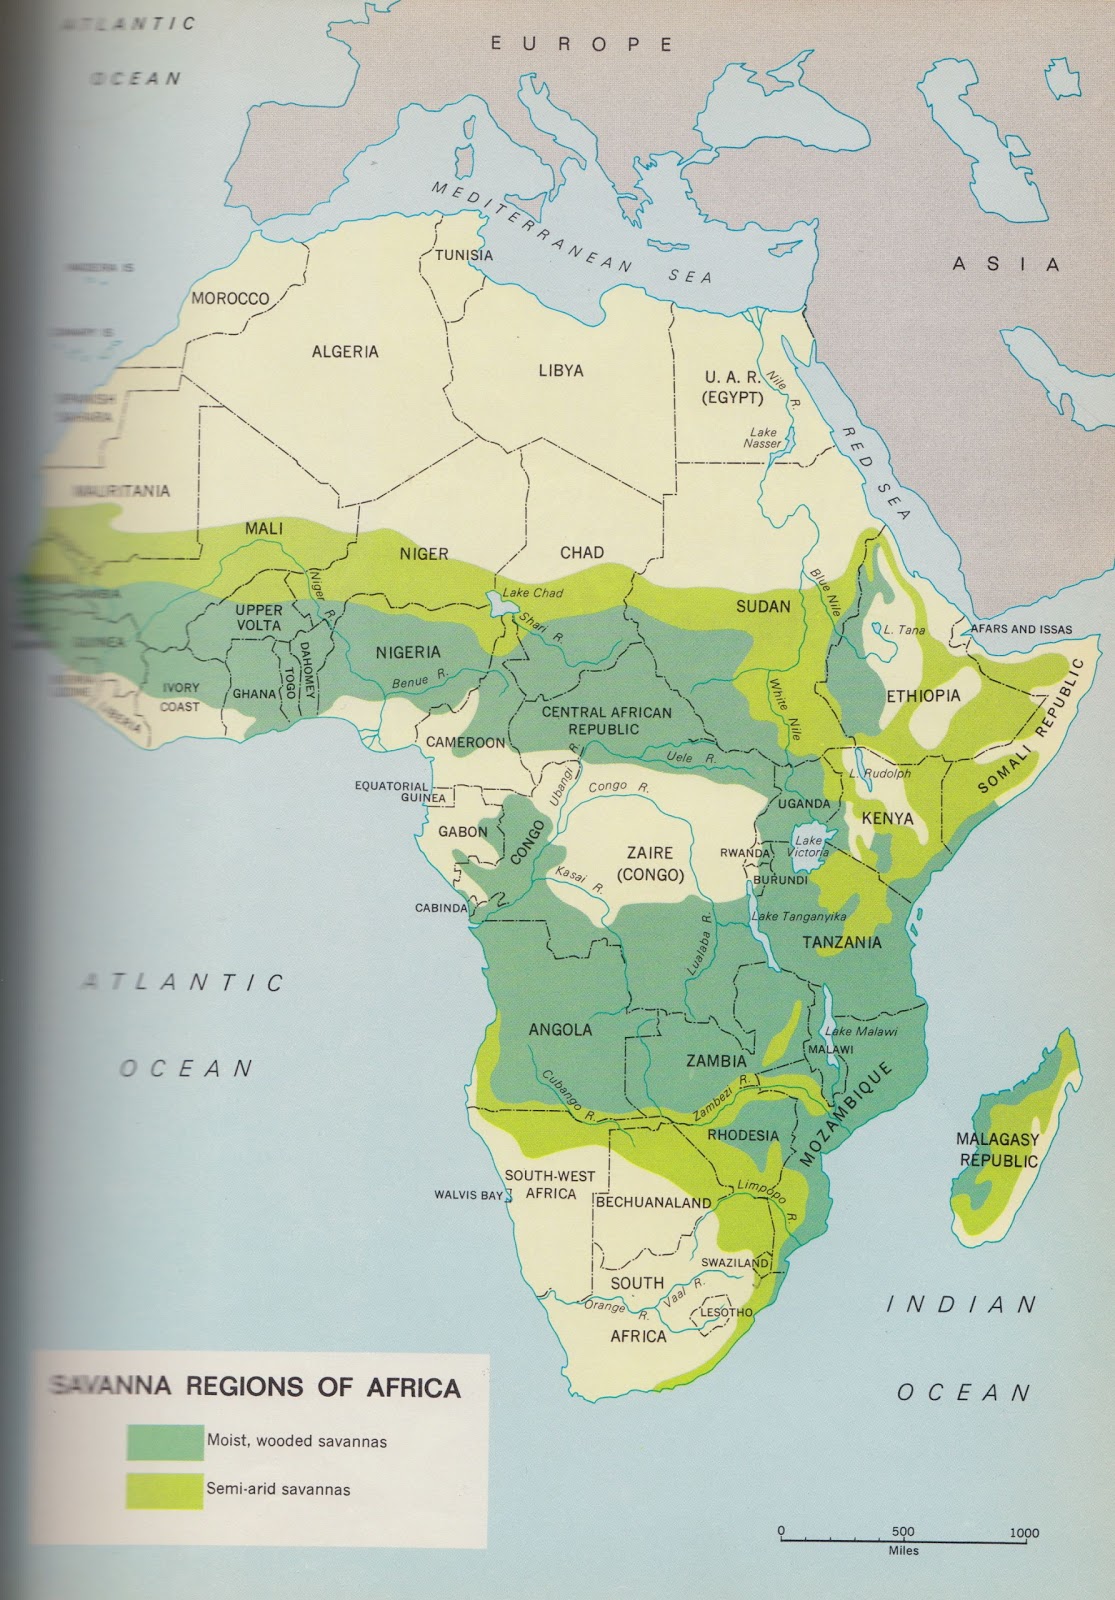 African Savannah: Location and Classification